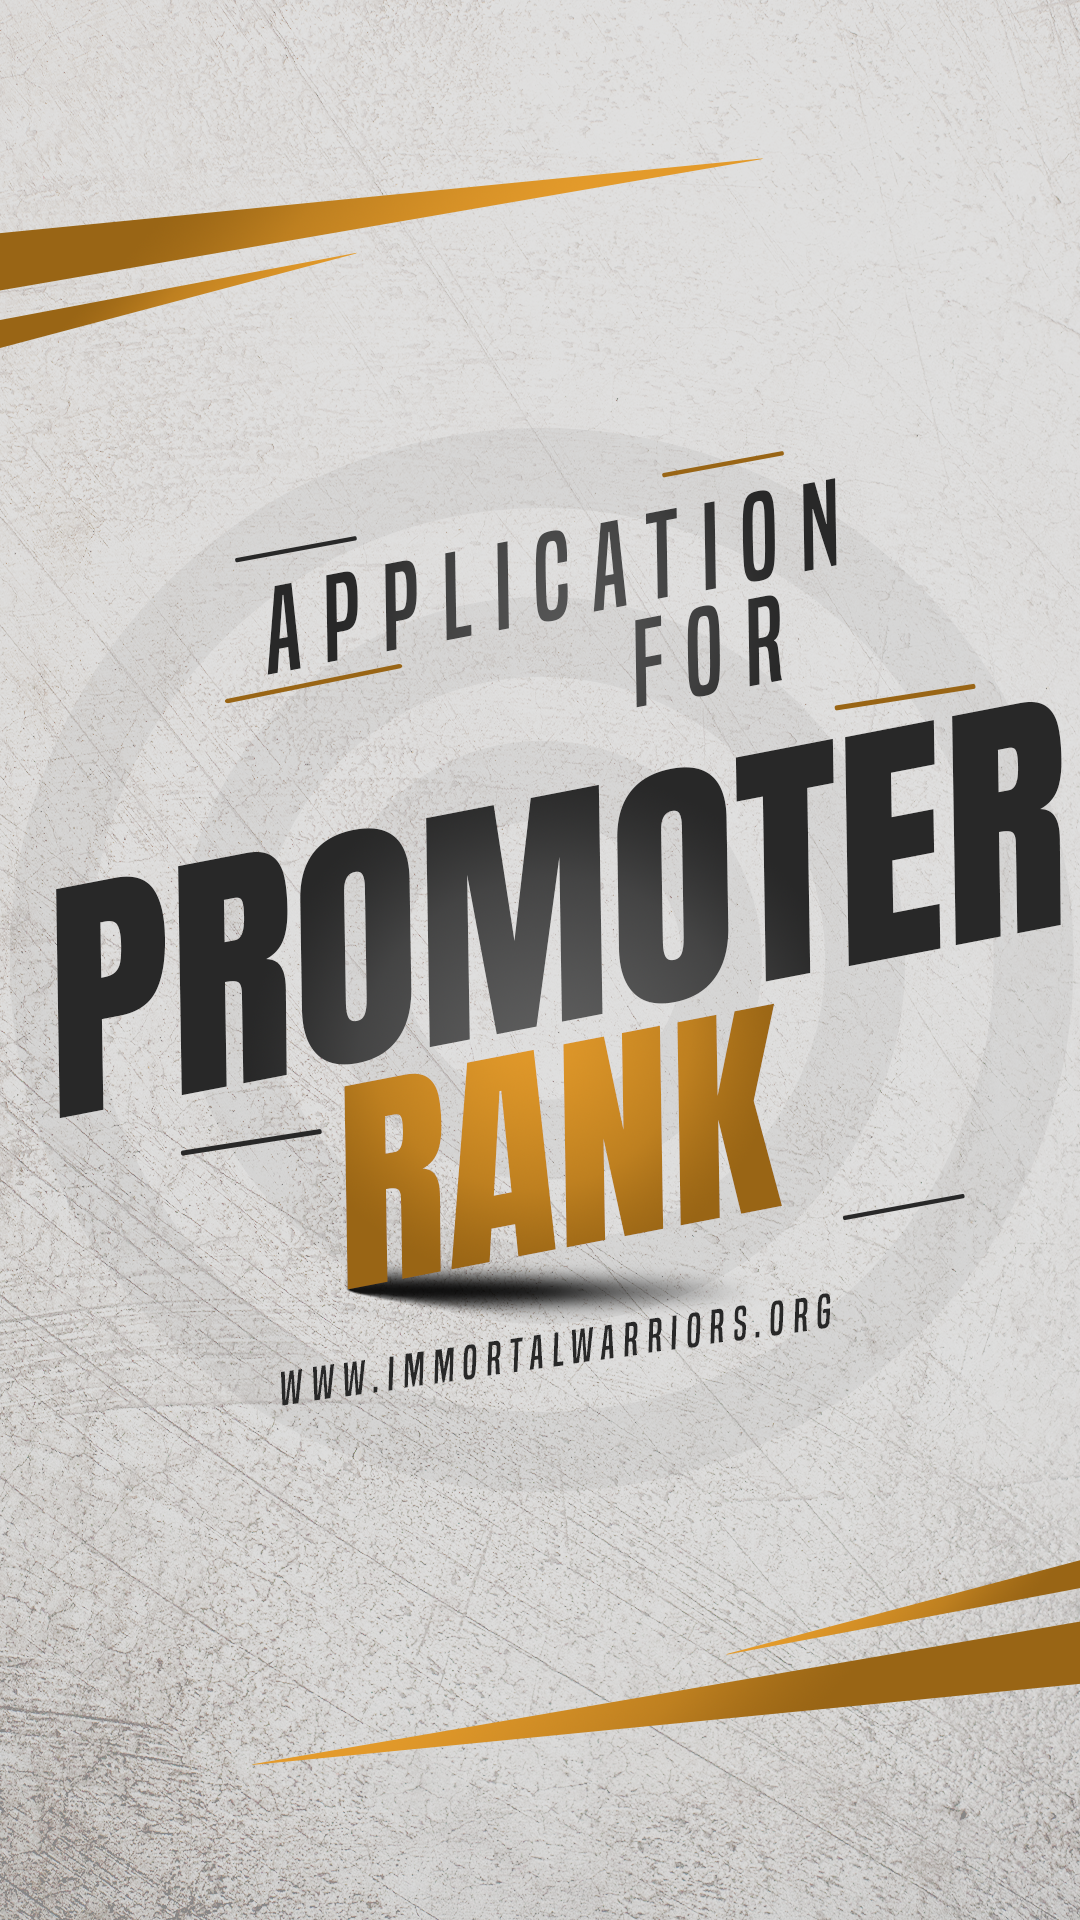 Application for promoter